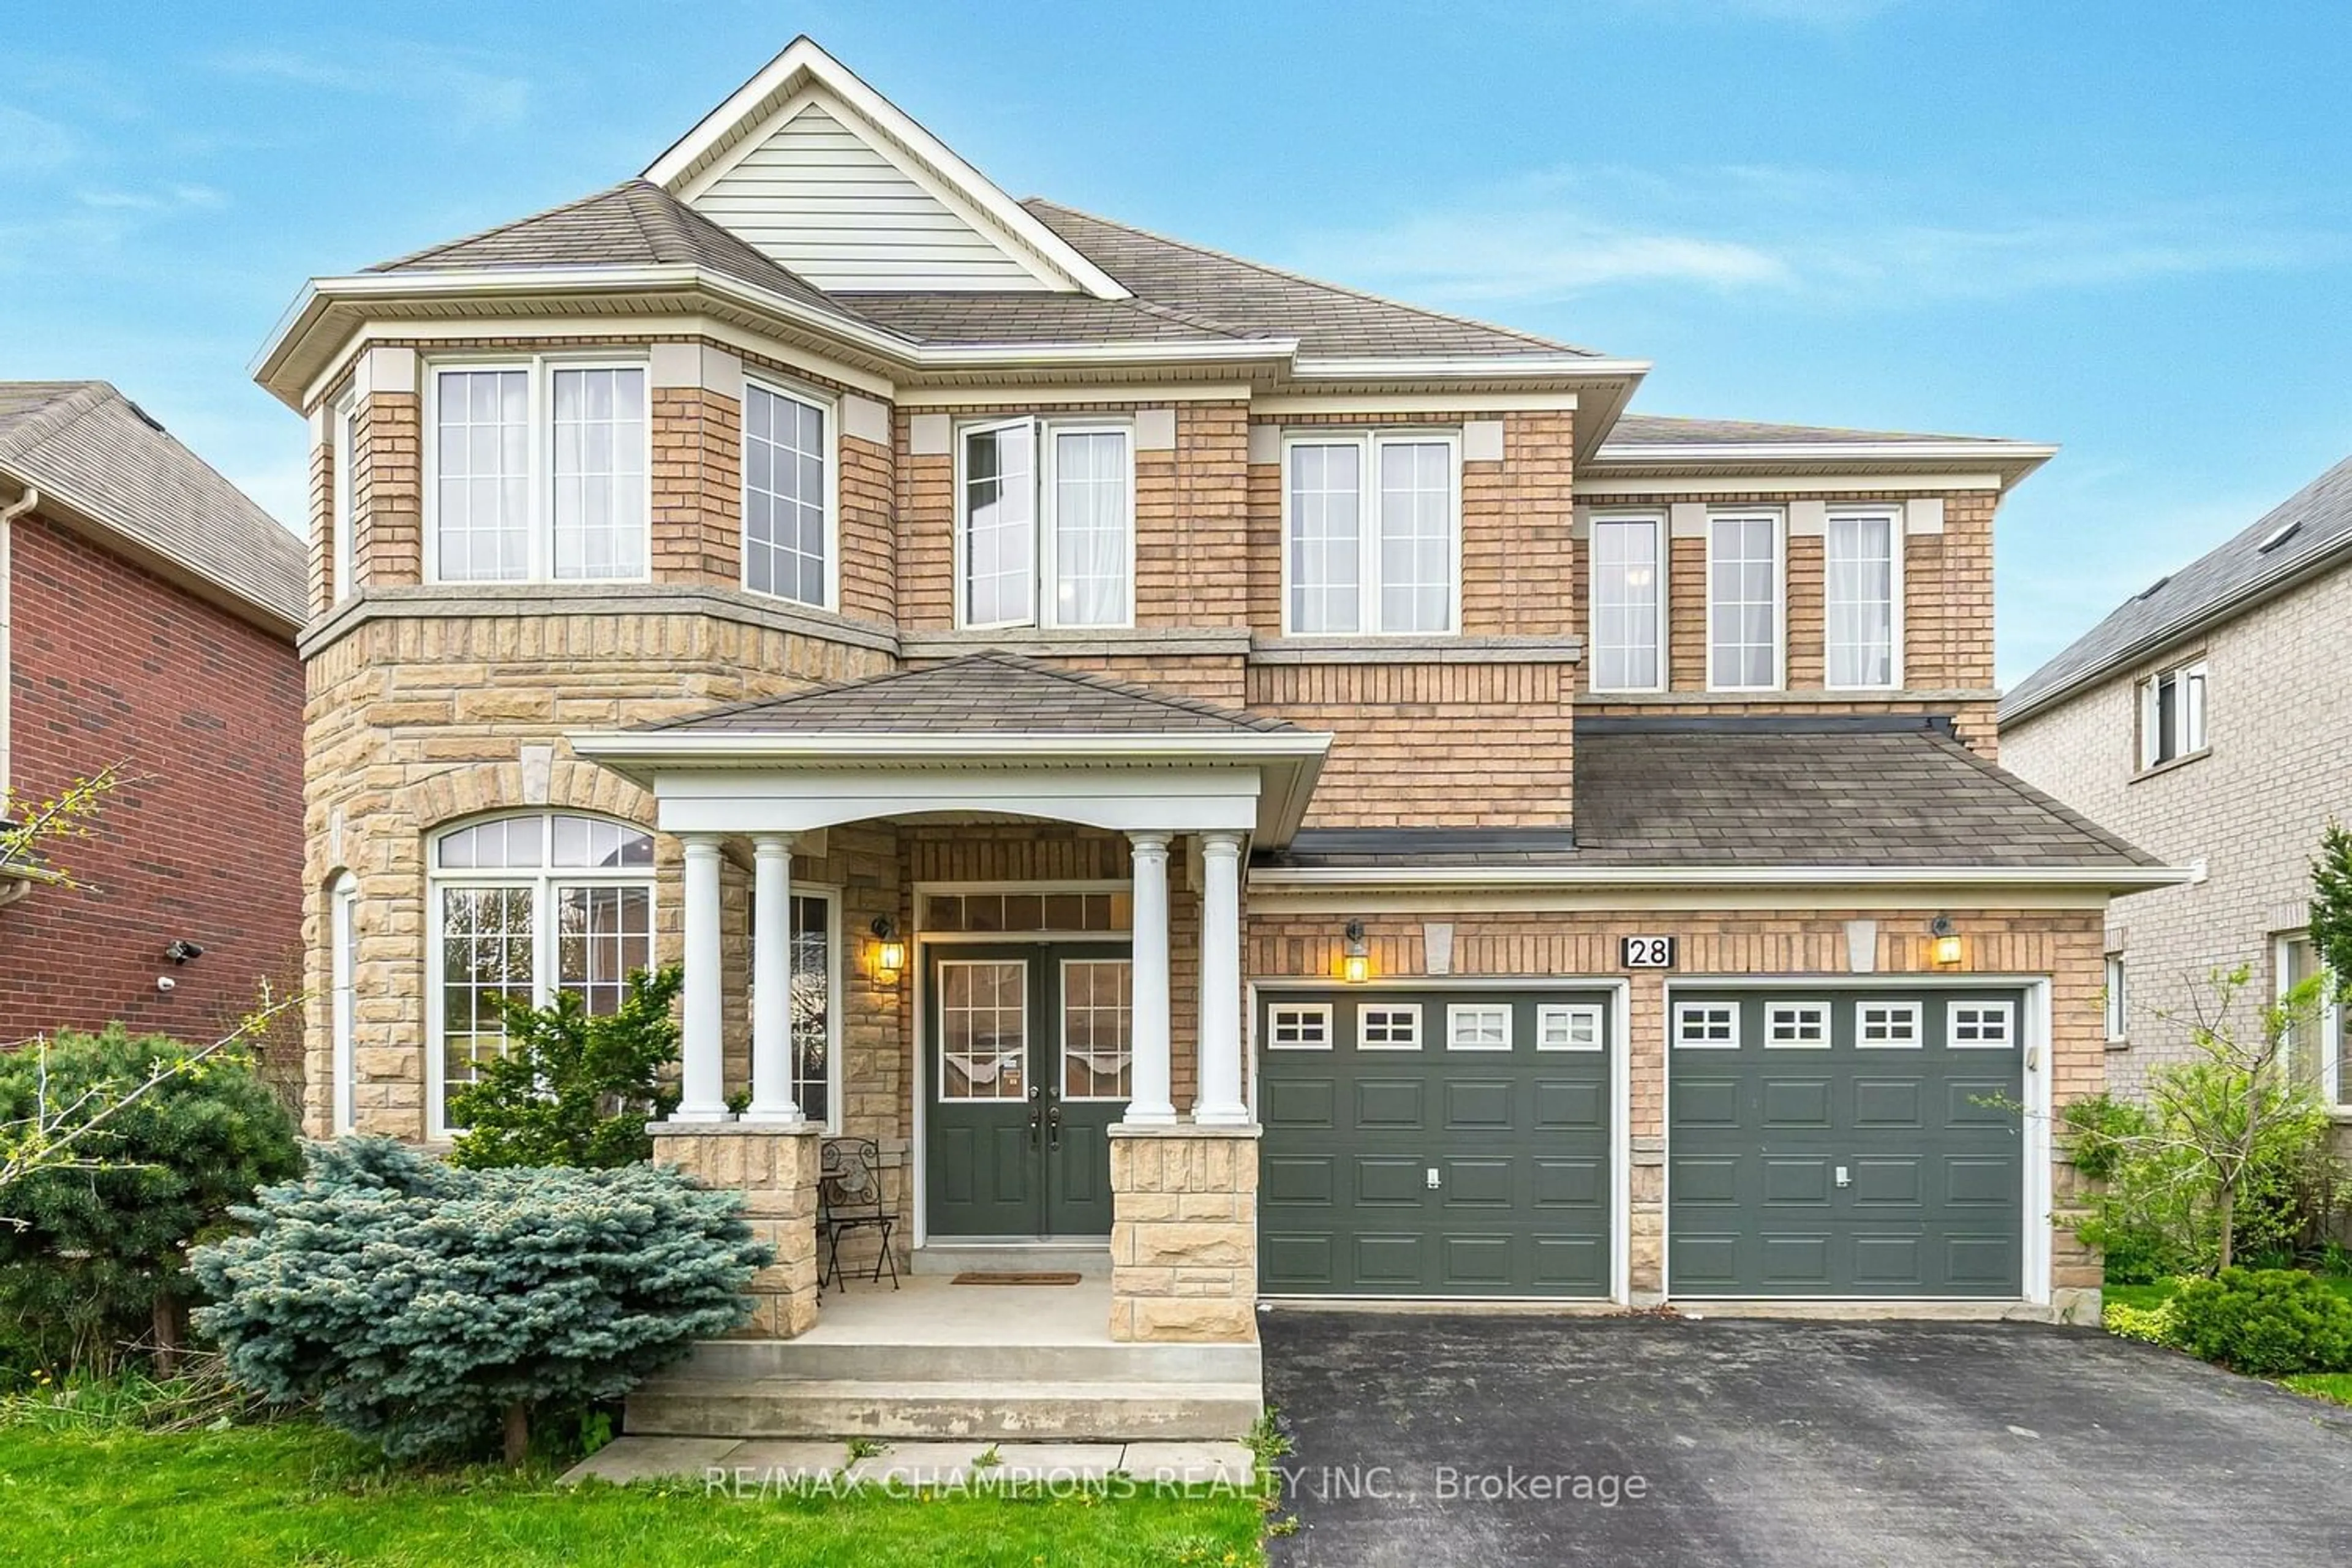 Home with brick exterior material for 28 Niceview Dr, Brampton Ontario L6R 0P6